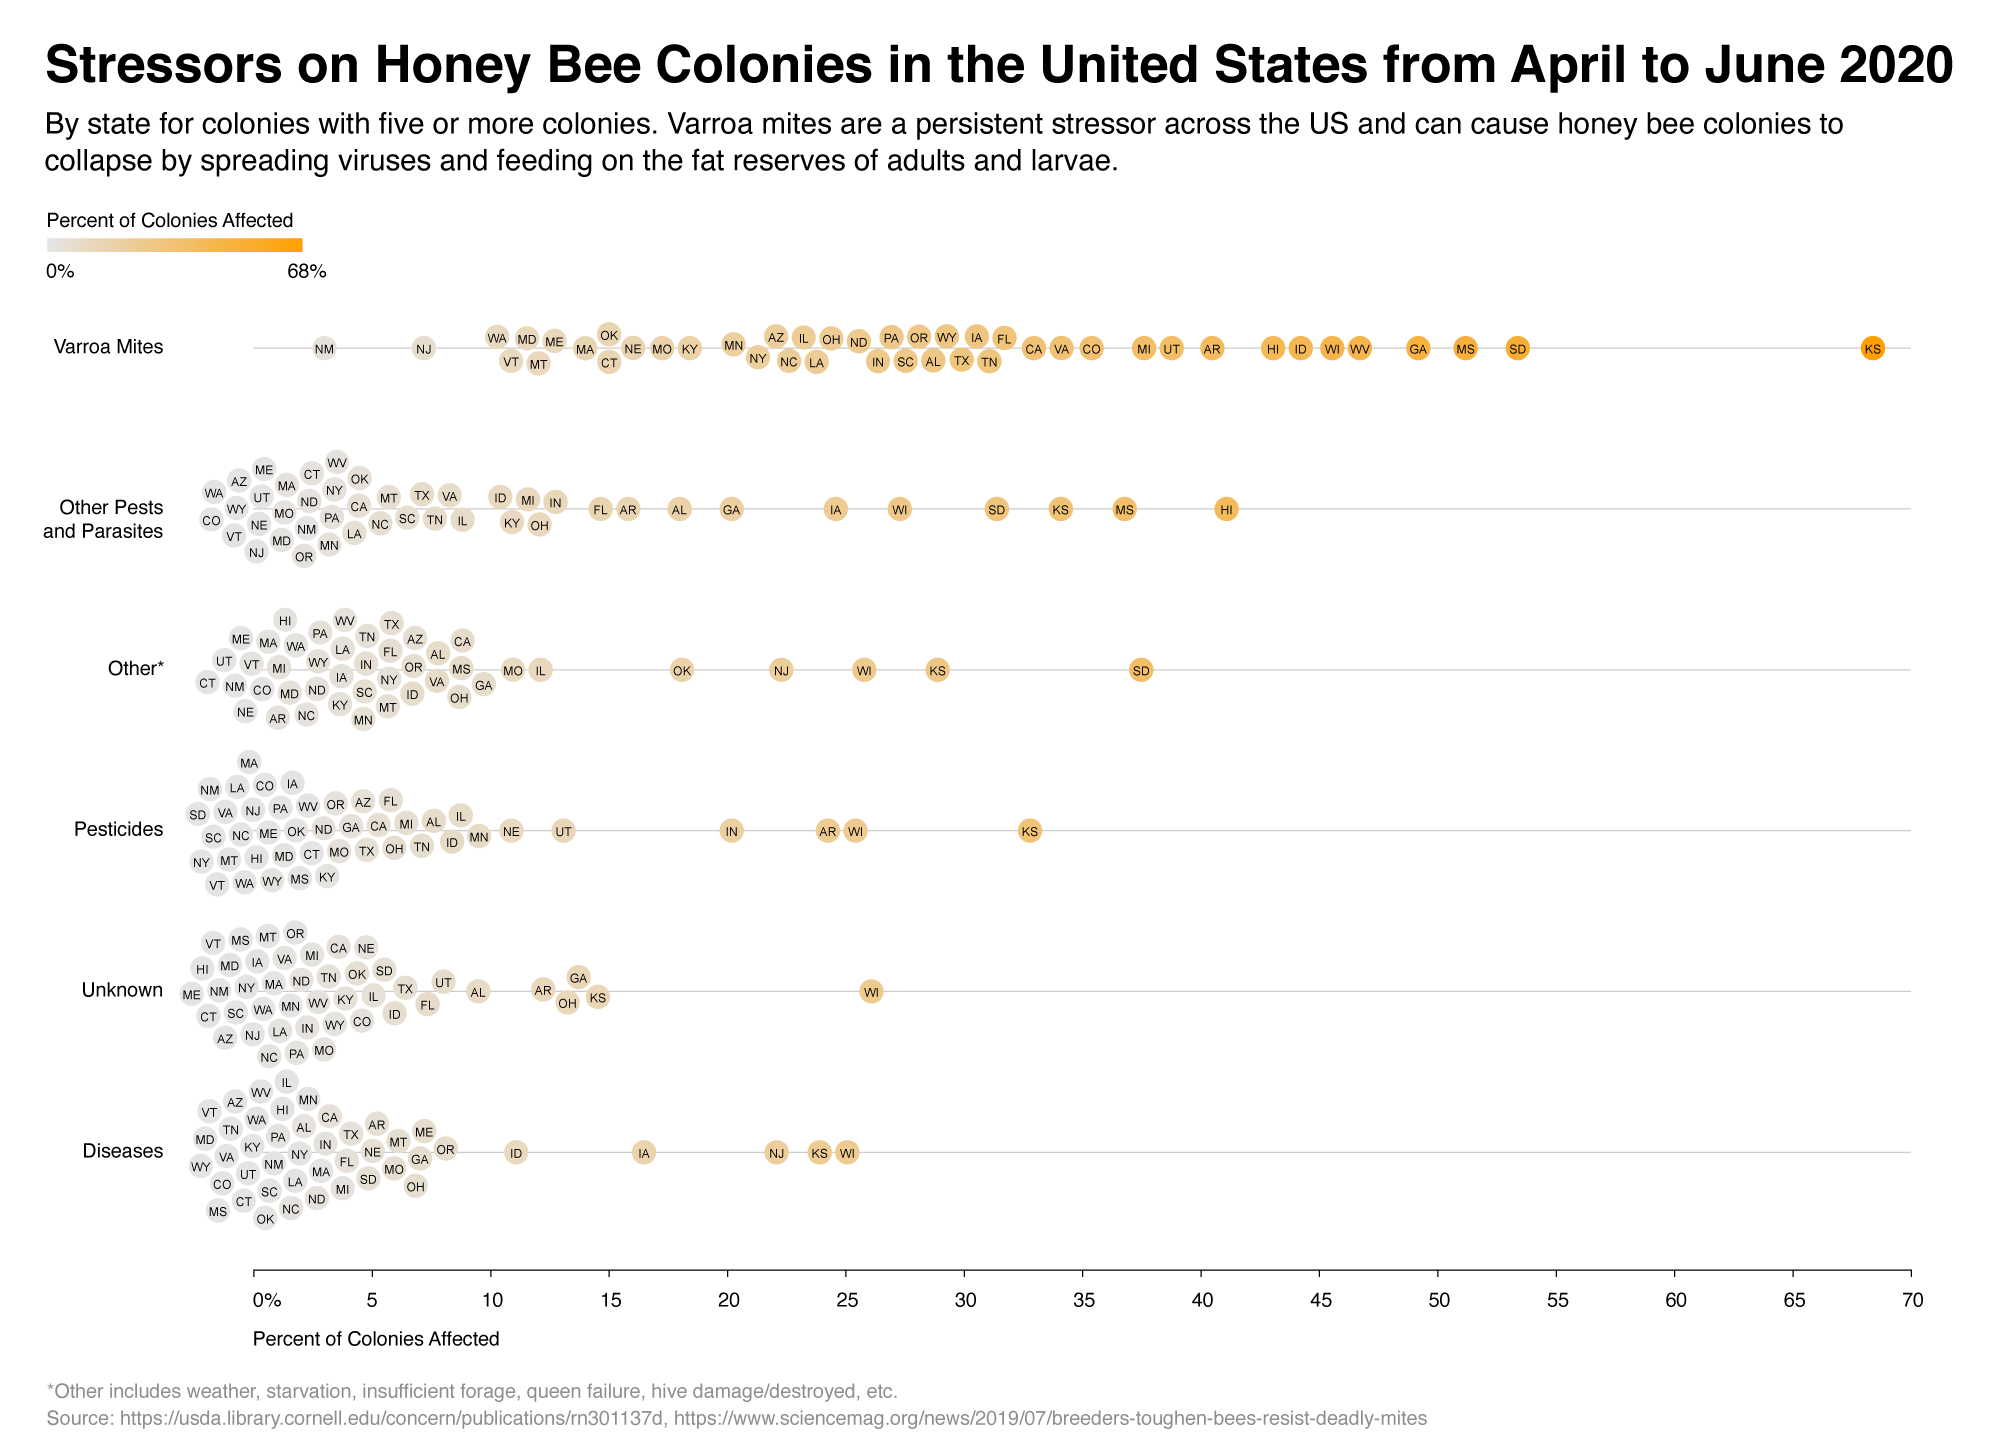 Beeswarm plot showing the different stressors on honey bee colonies across the states in the US. It shows that Varroa Mites are a big stressor in all states compared to the other stressors.